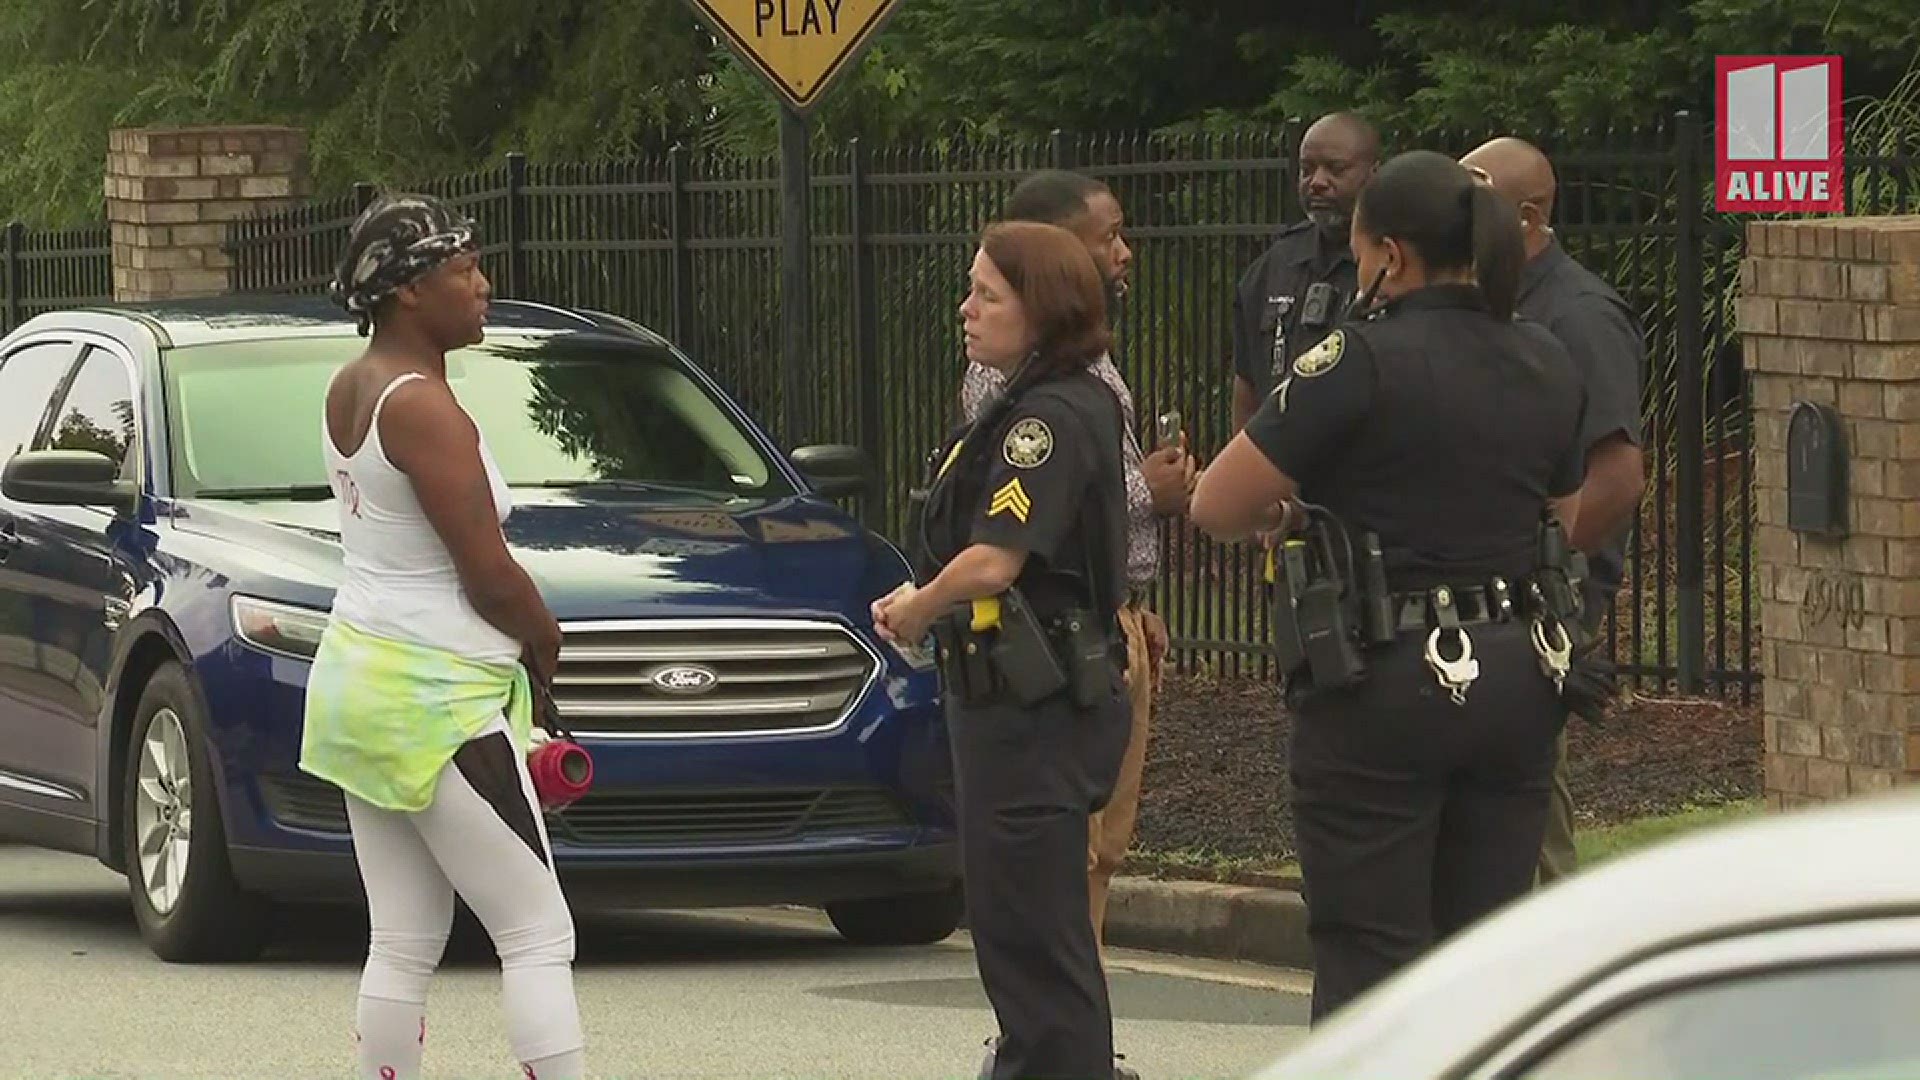 A group of about 10 peaceful protesters showed up outside the home of Atlanta Mayor Keisha Lance Bottoms early Saturday morning. They departed without incident.